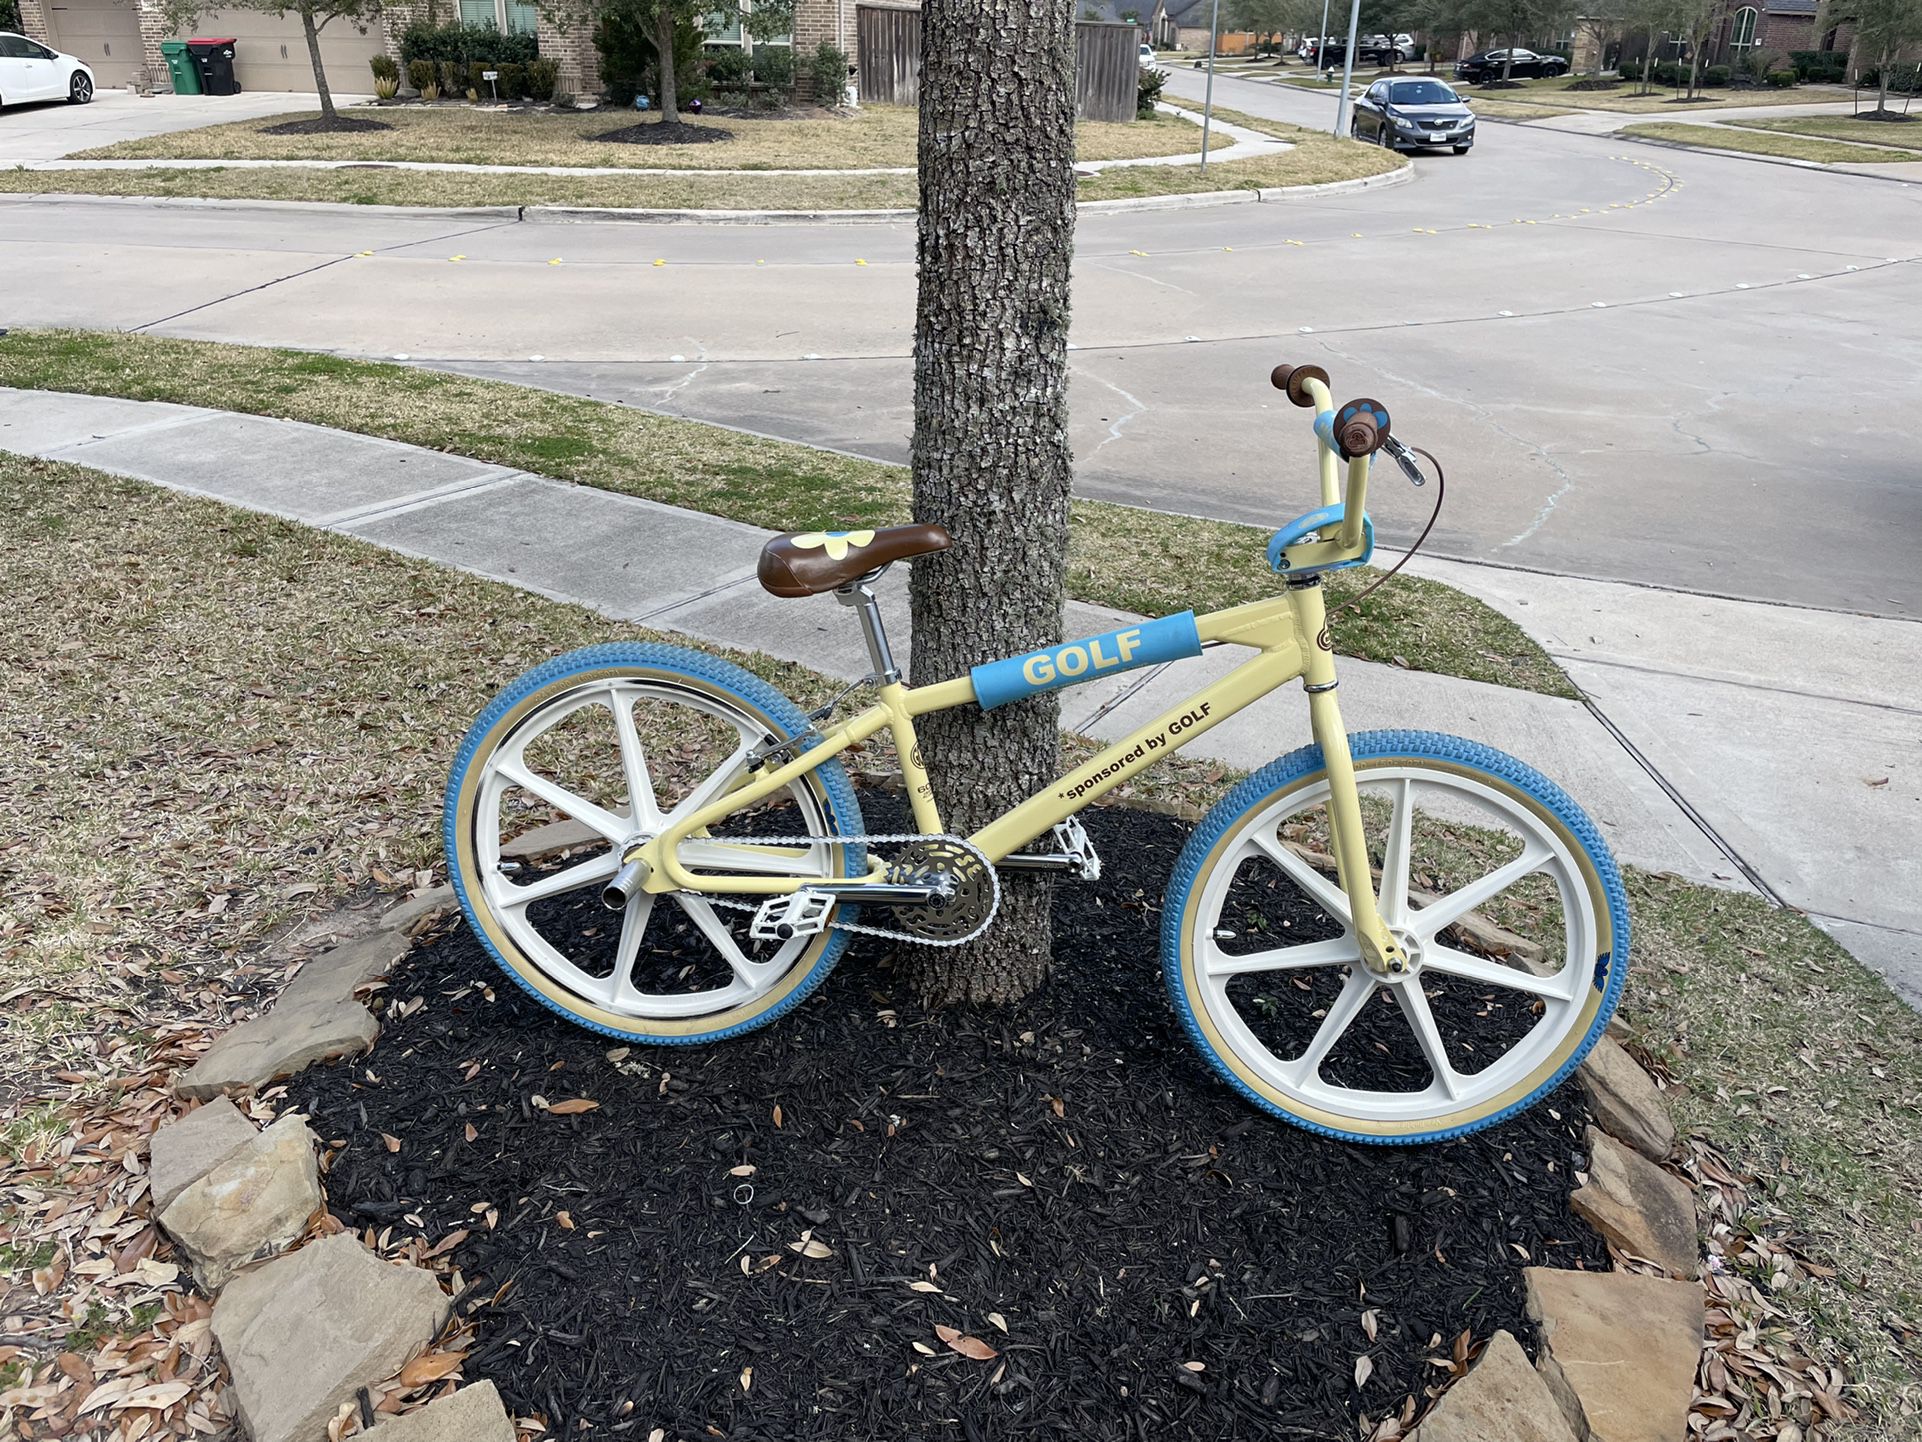 Golf x SE bikes flyer 24 Tyler The Creator Limited Edition 300 Made